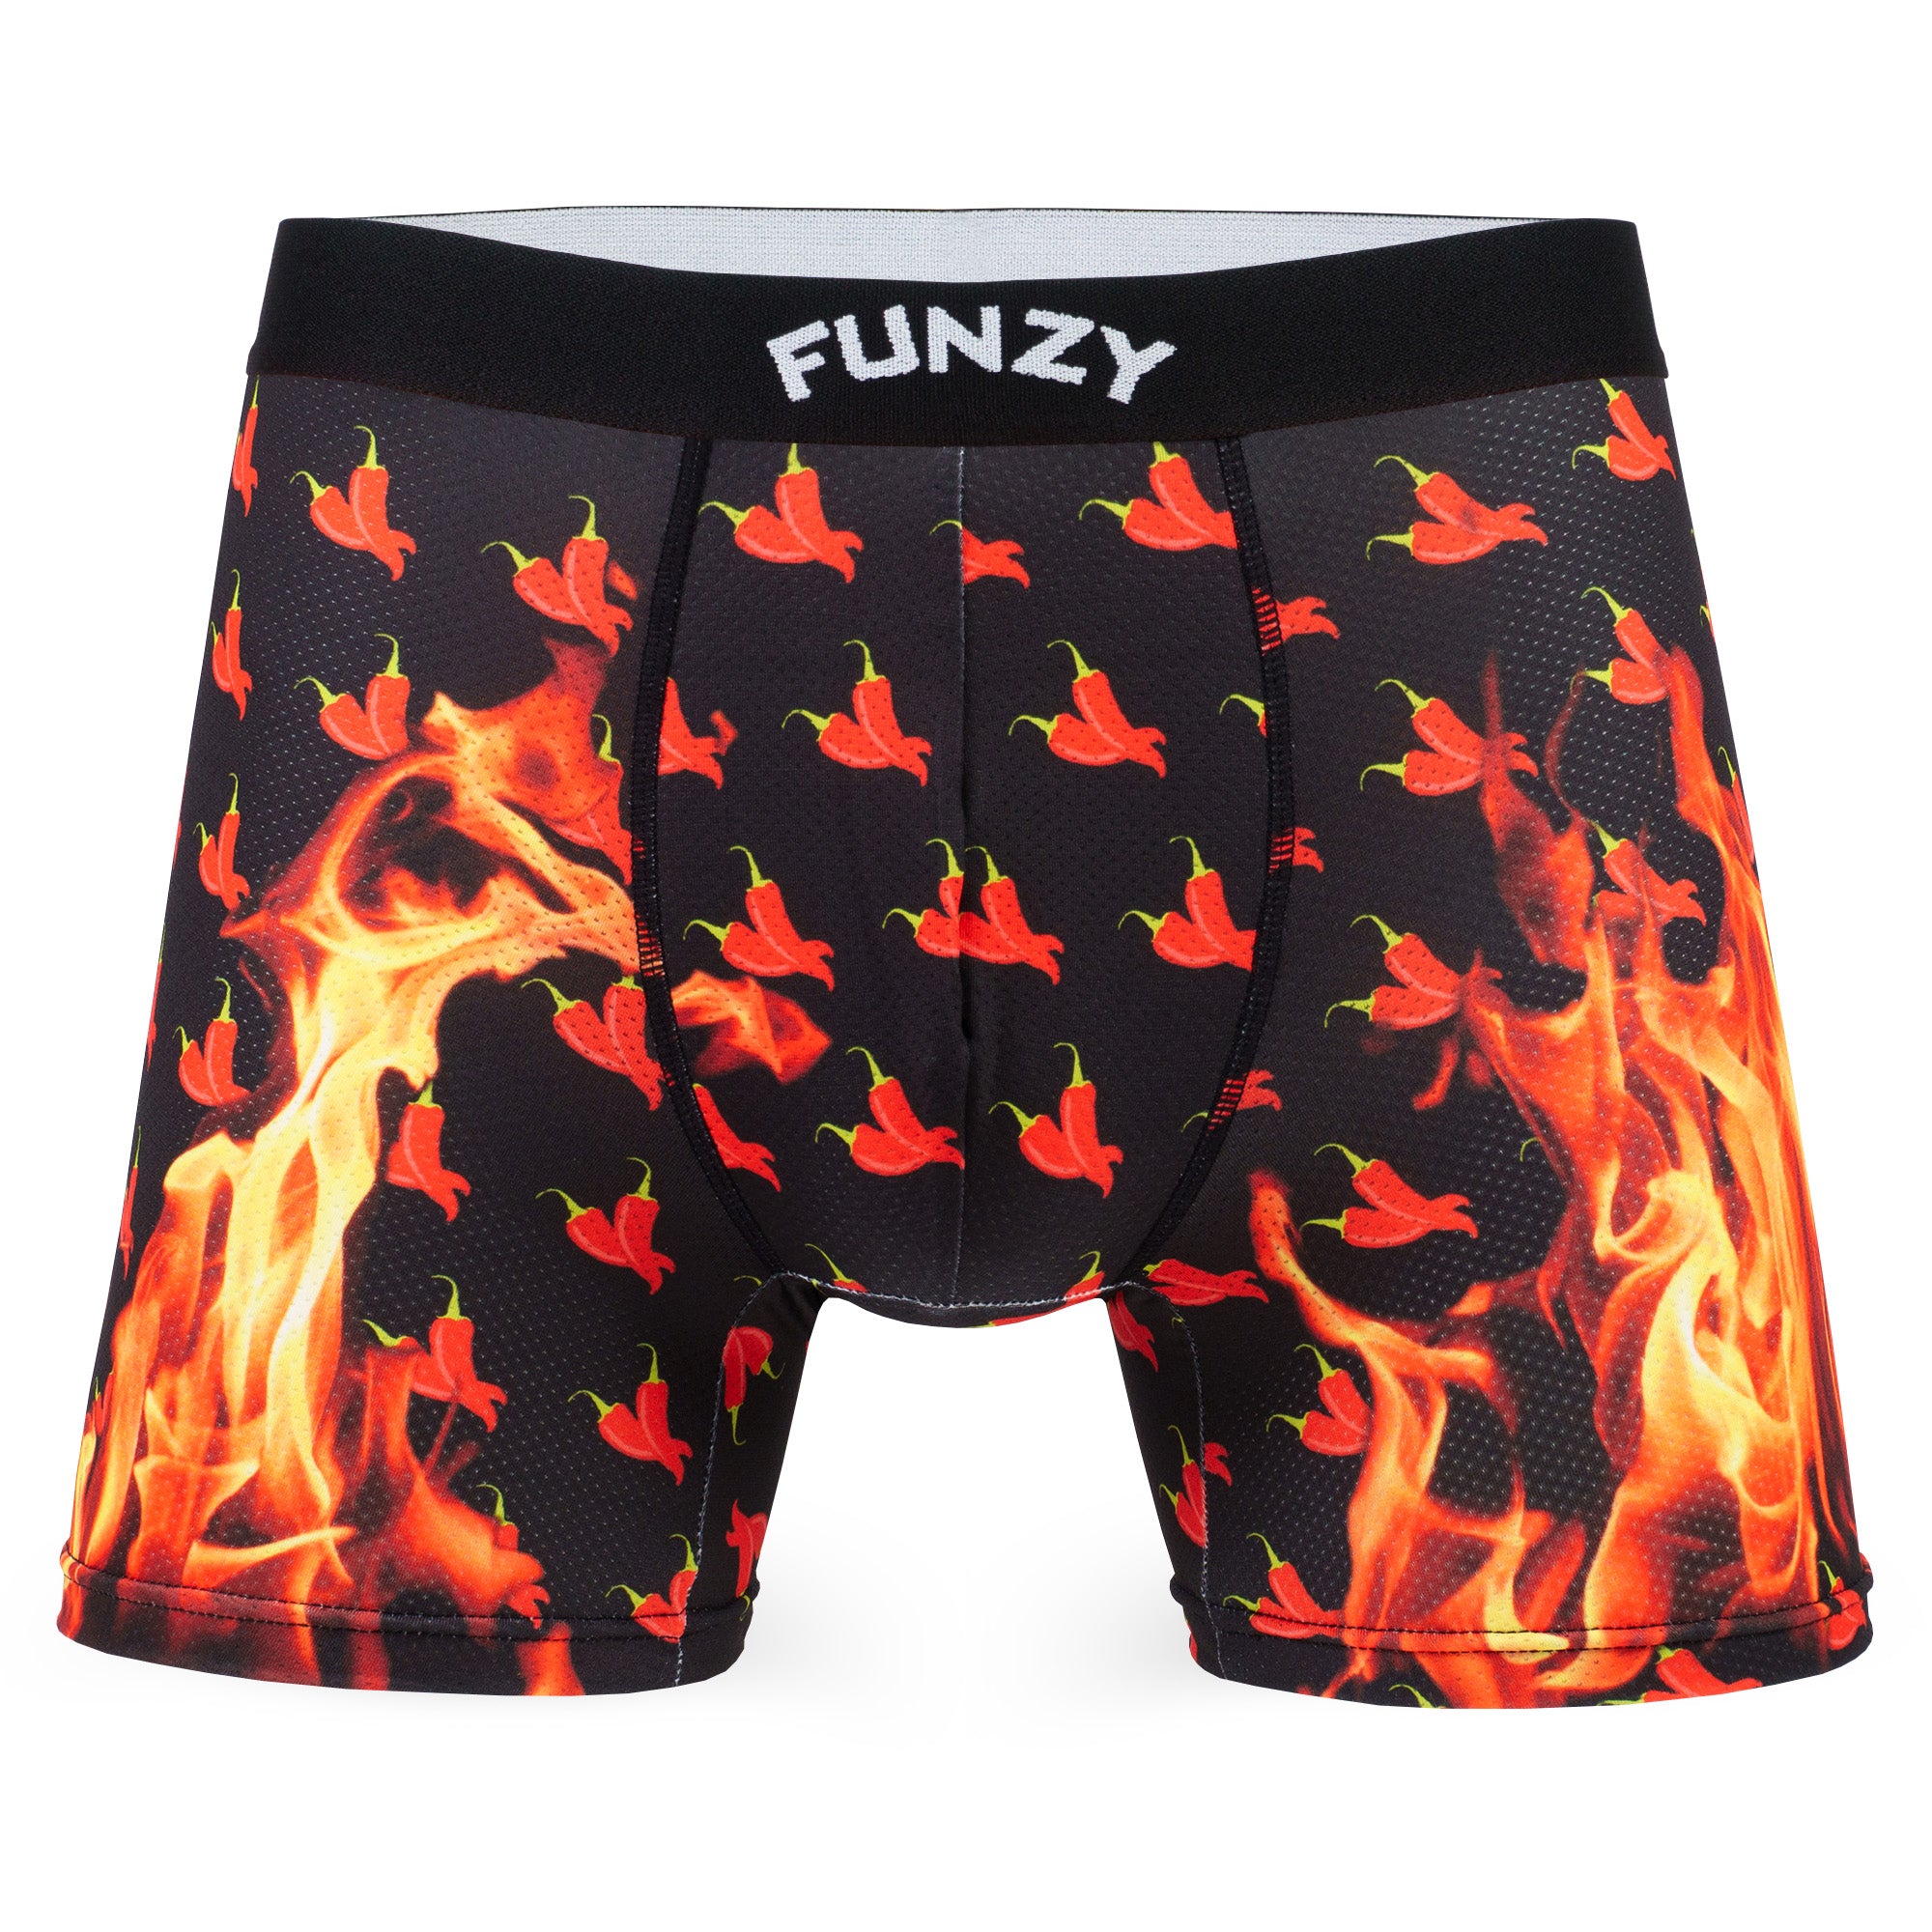 Boxer Funzy Red Hot Chilli